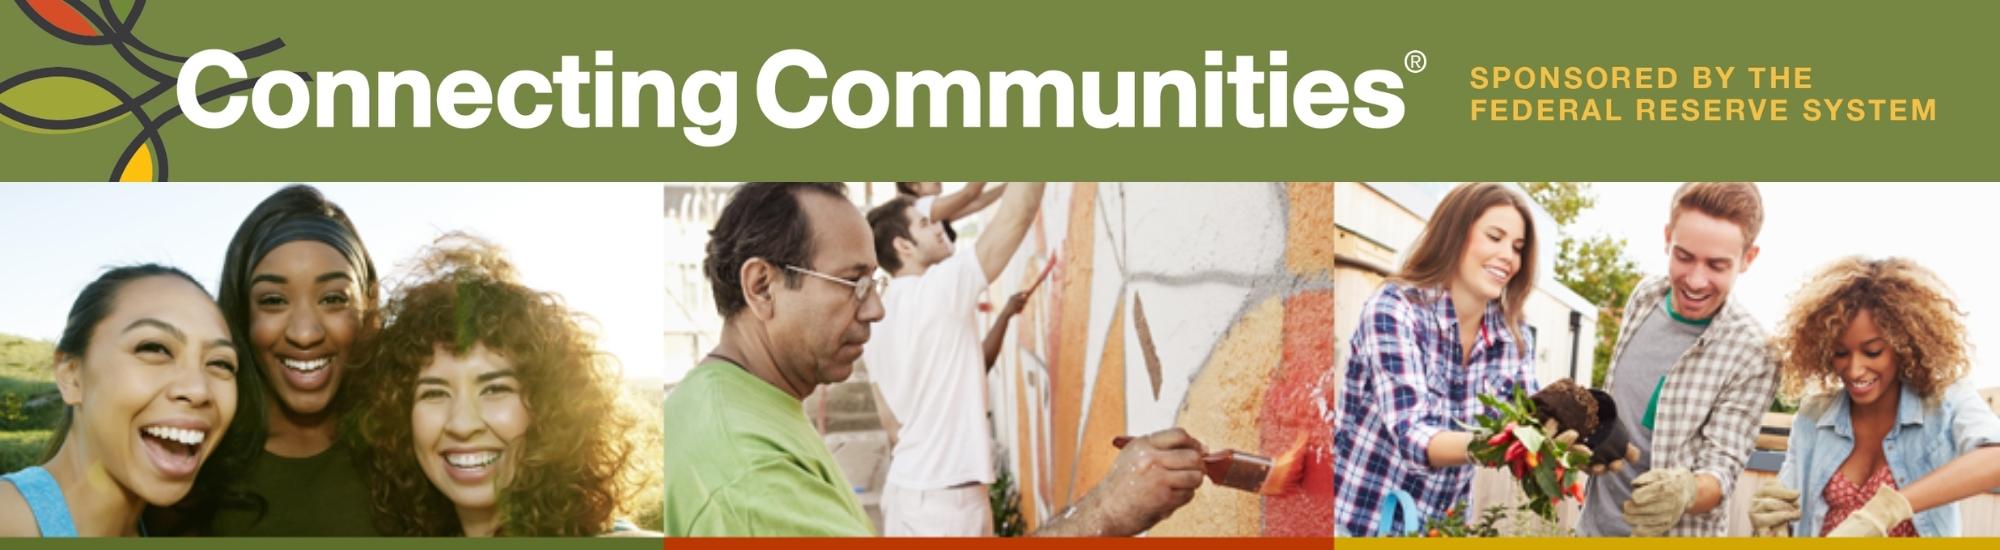 Connecting Communities, sponsored by the Federal Reserve System